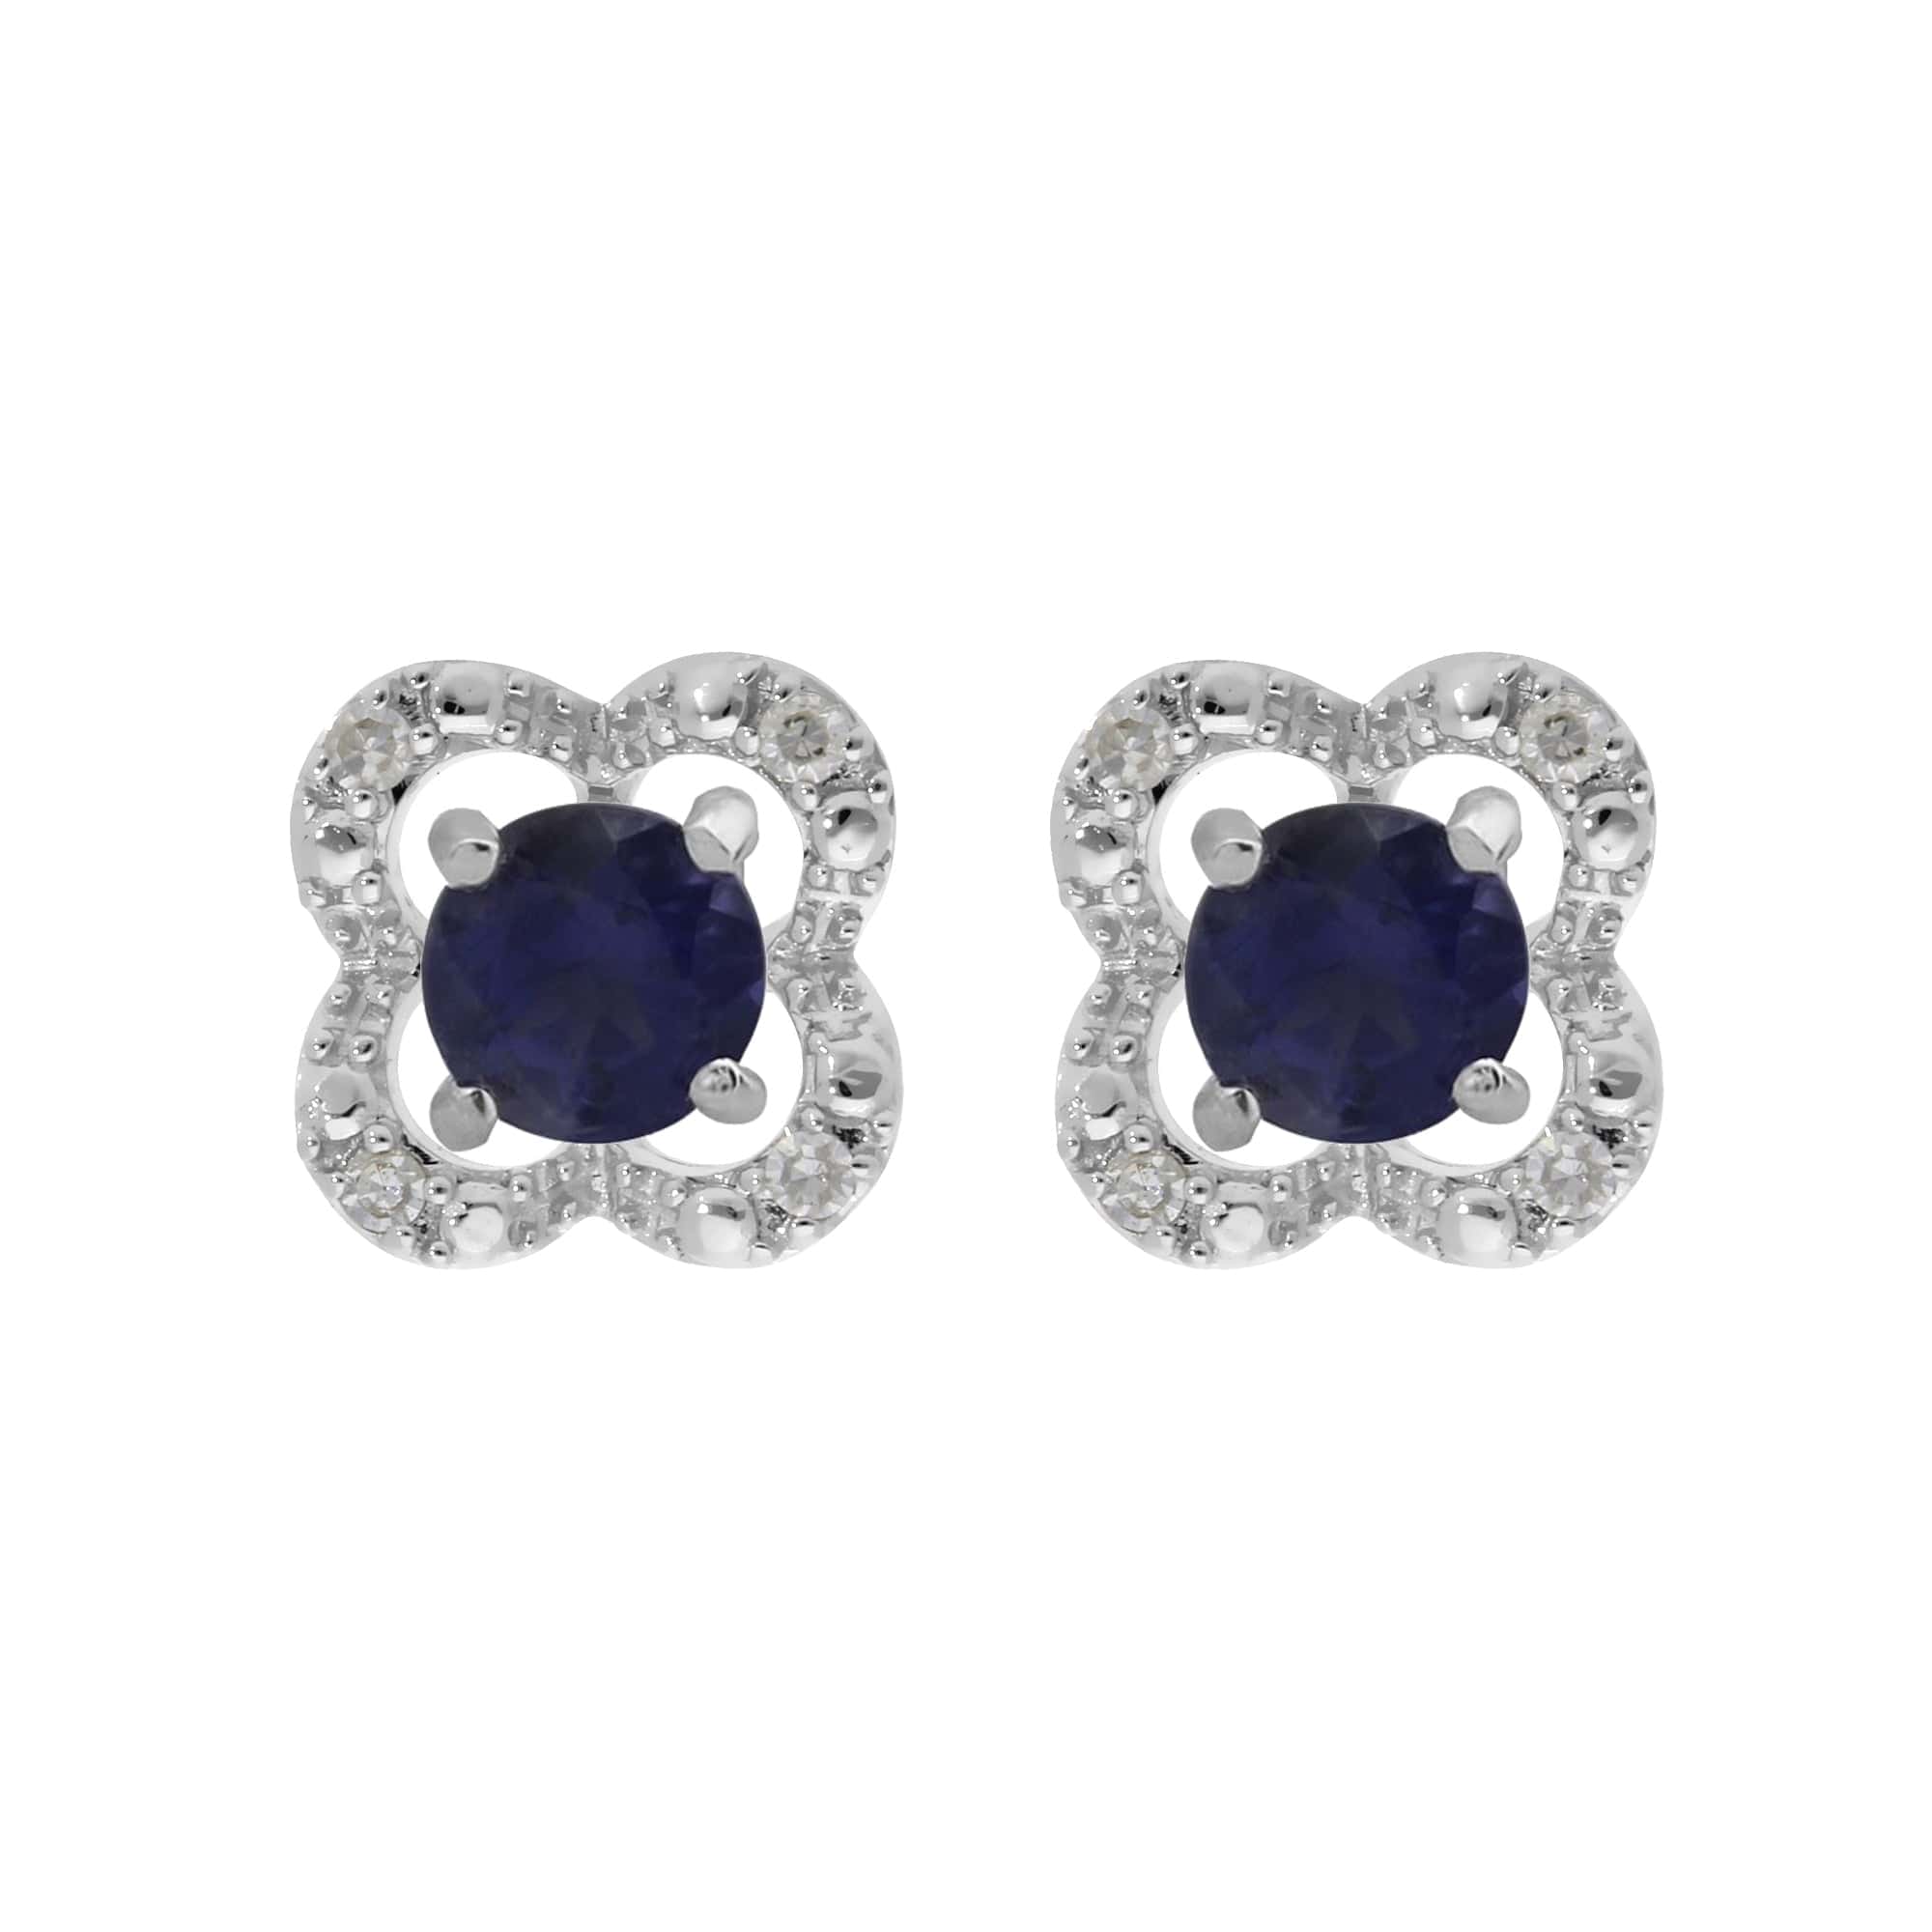 162E0071189-162E0244019 Classic Round Iolite Stud Earrings with Detachable Diamond Flower Ear Jacket in 9ct White Gold 1